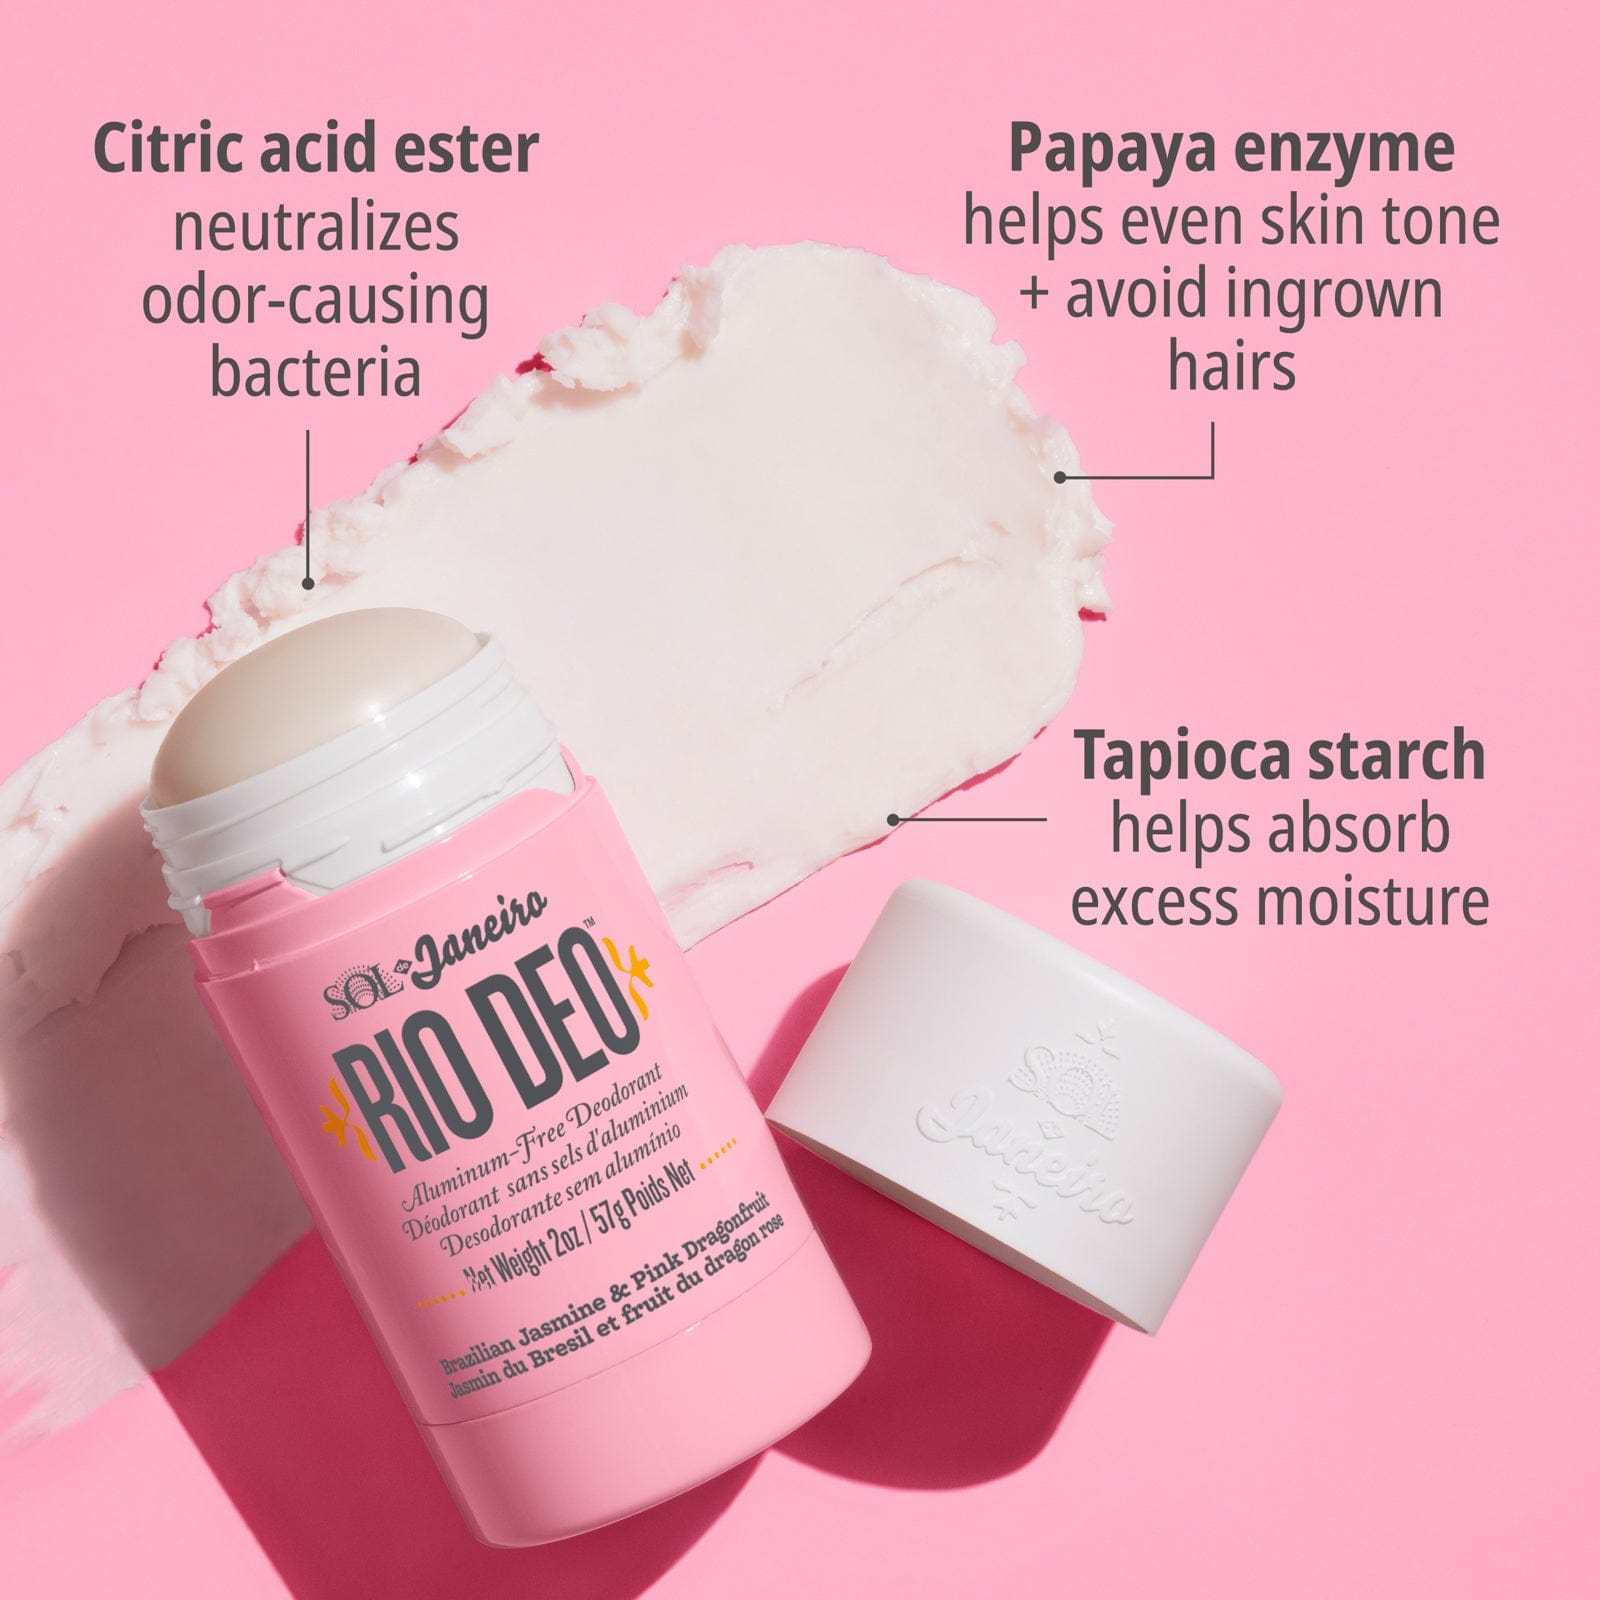 citric acid ester - neutralizes odor-causing bacteria | Papaya enzyme - helps even skin tone and avoid ingrown hairs | tapioca starch - helps absorb excess moisture